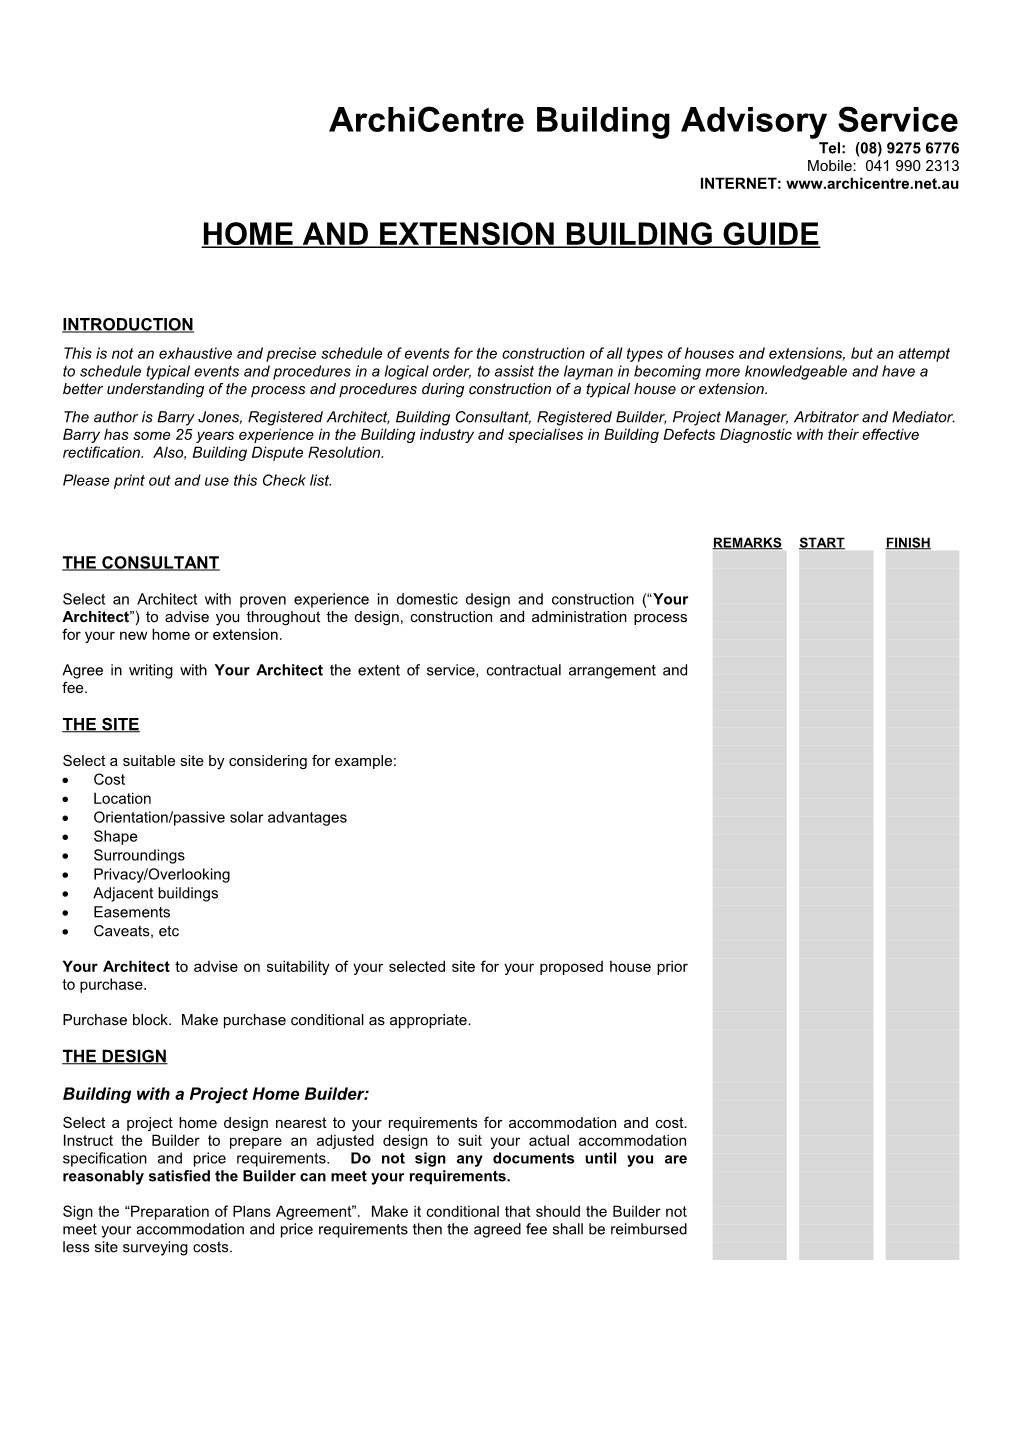 Back Home Forward Buying Building Extending Checklist Guide